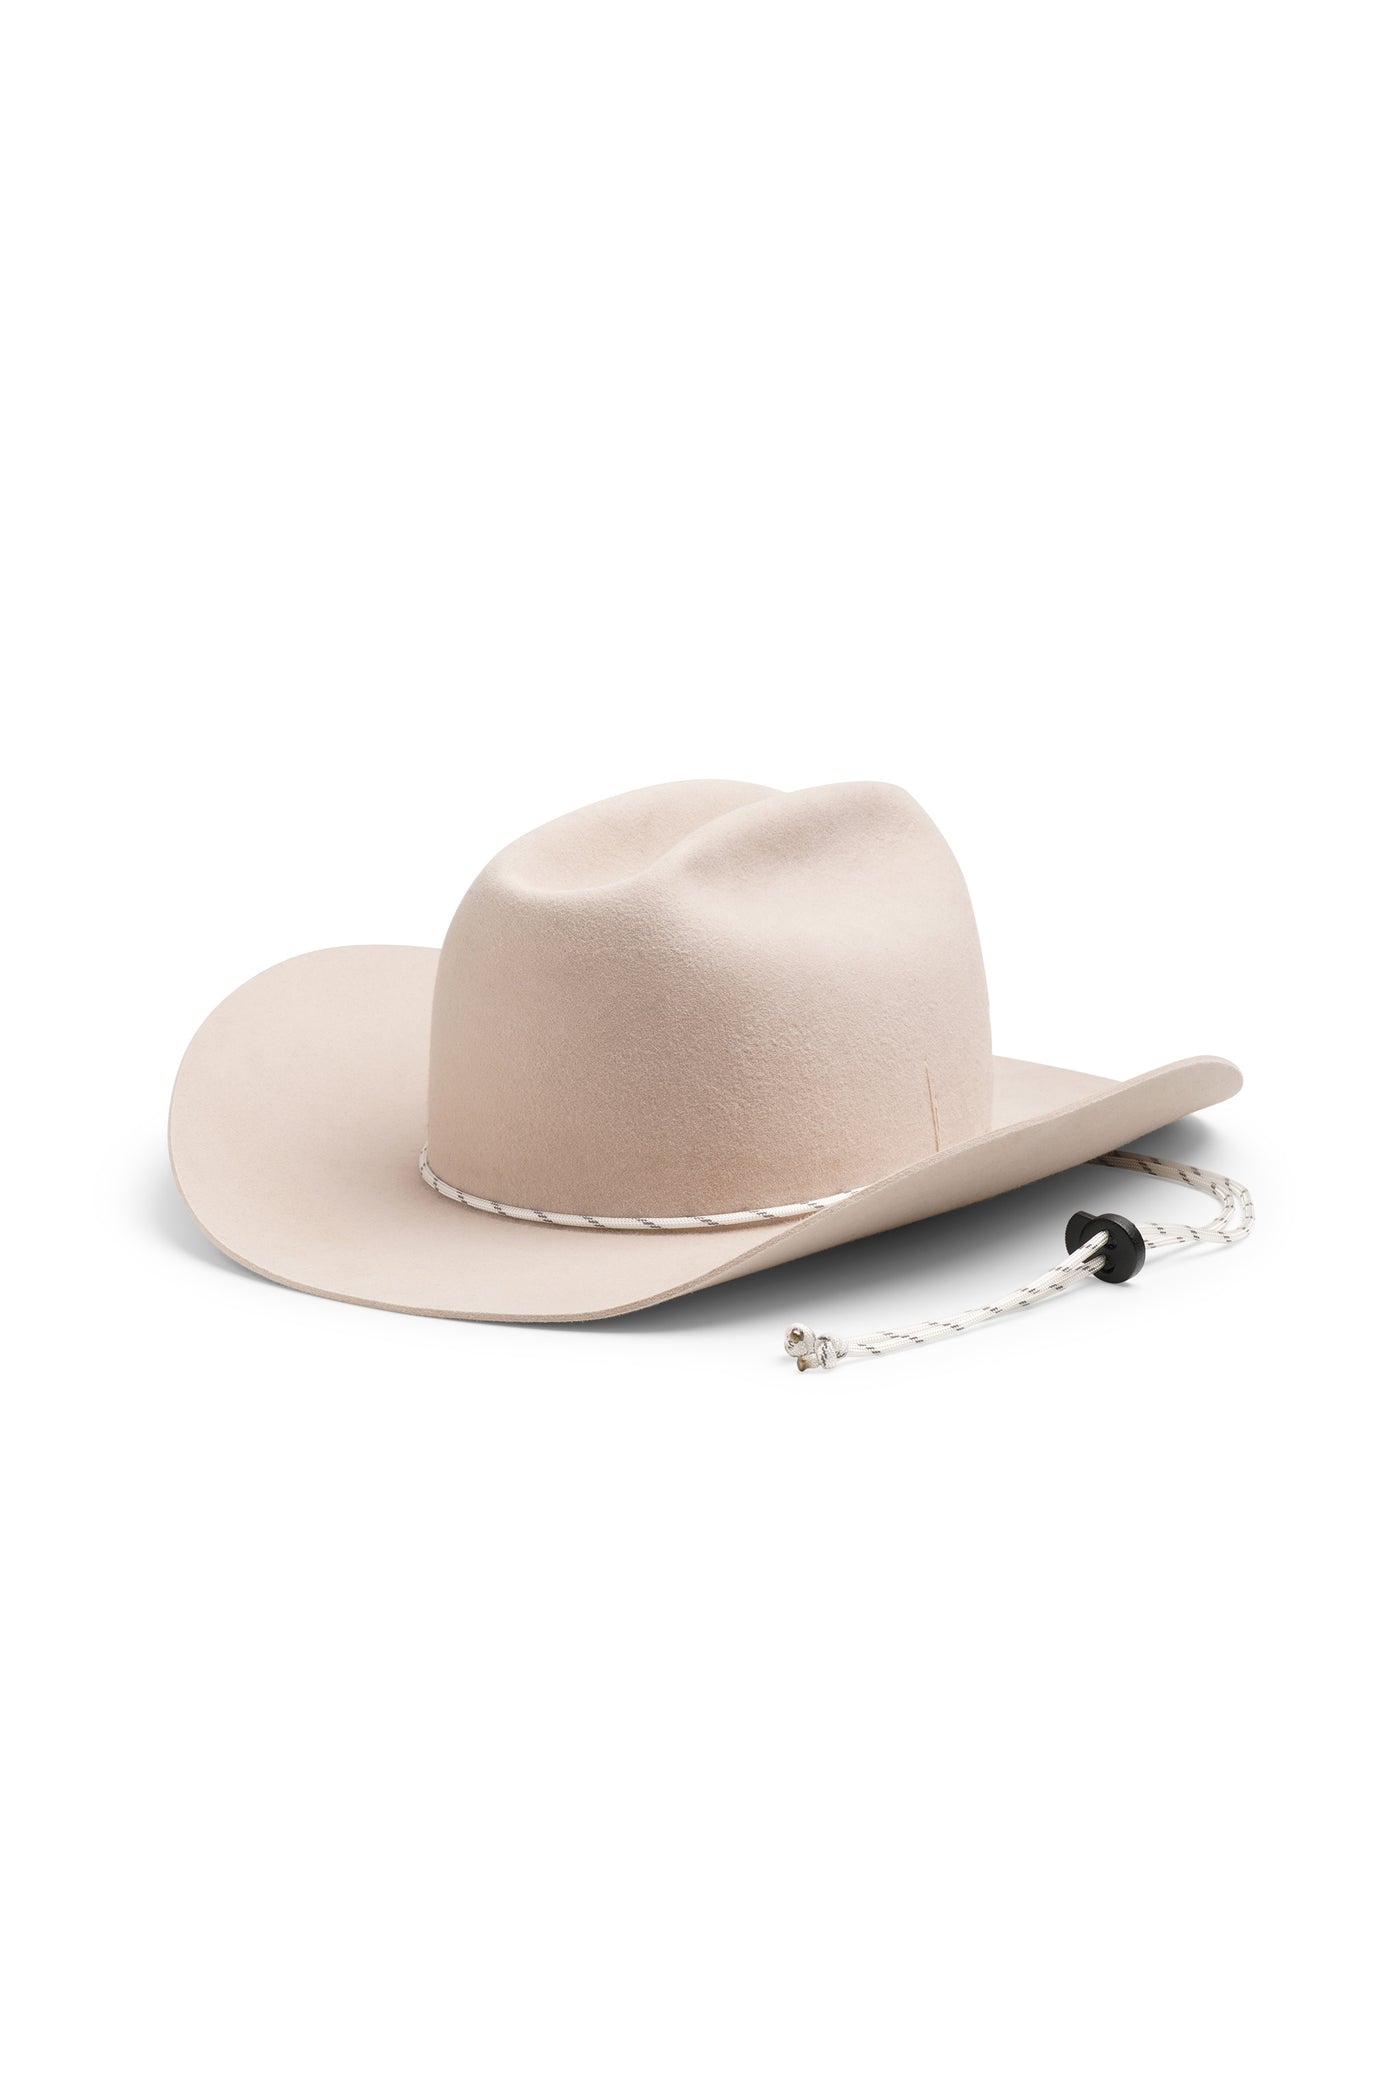 Unisex beige cowboy fur felt hat with a wide brim and center crease. Black and white paracord chin strap detail, handcrafted by SoonNoon in Stockholm